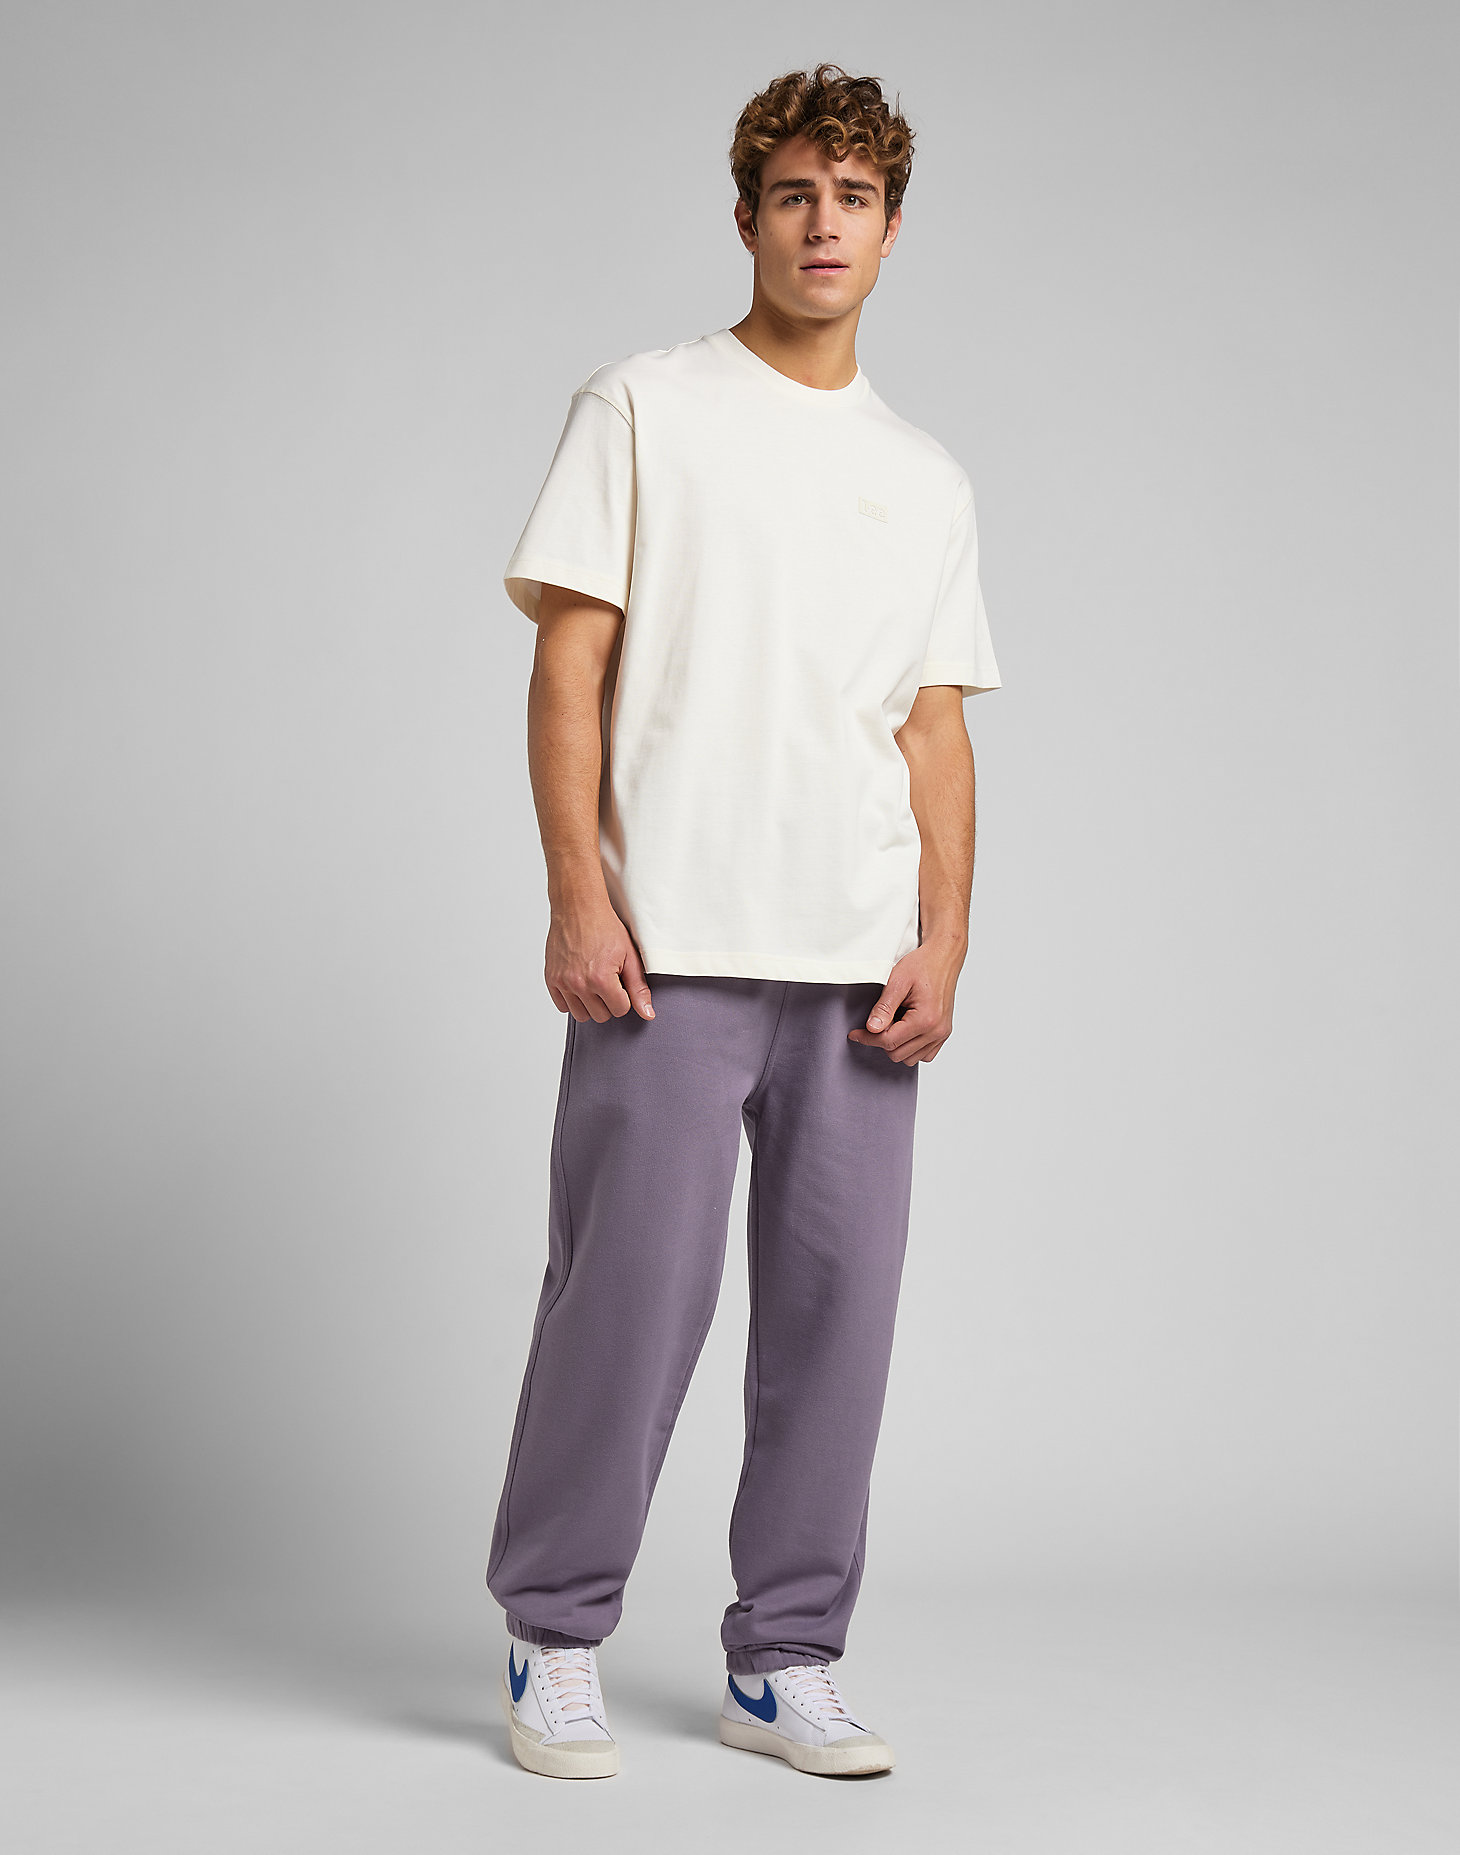 Sweat Pant in Washed Purple alternative view 5